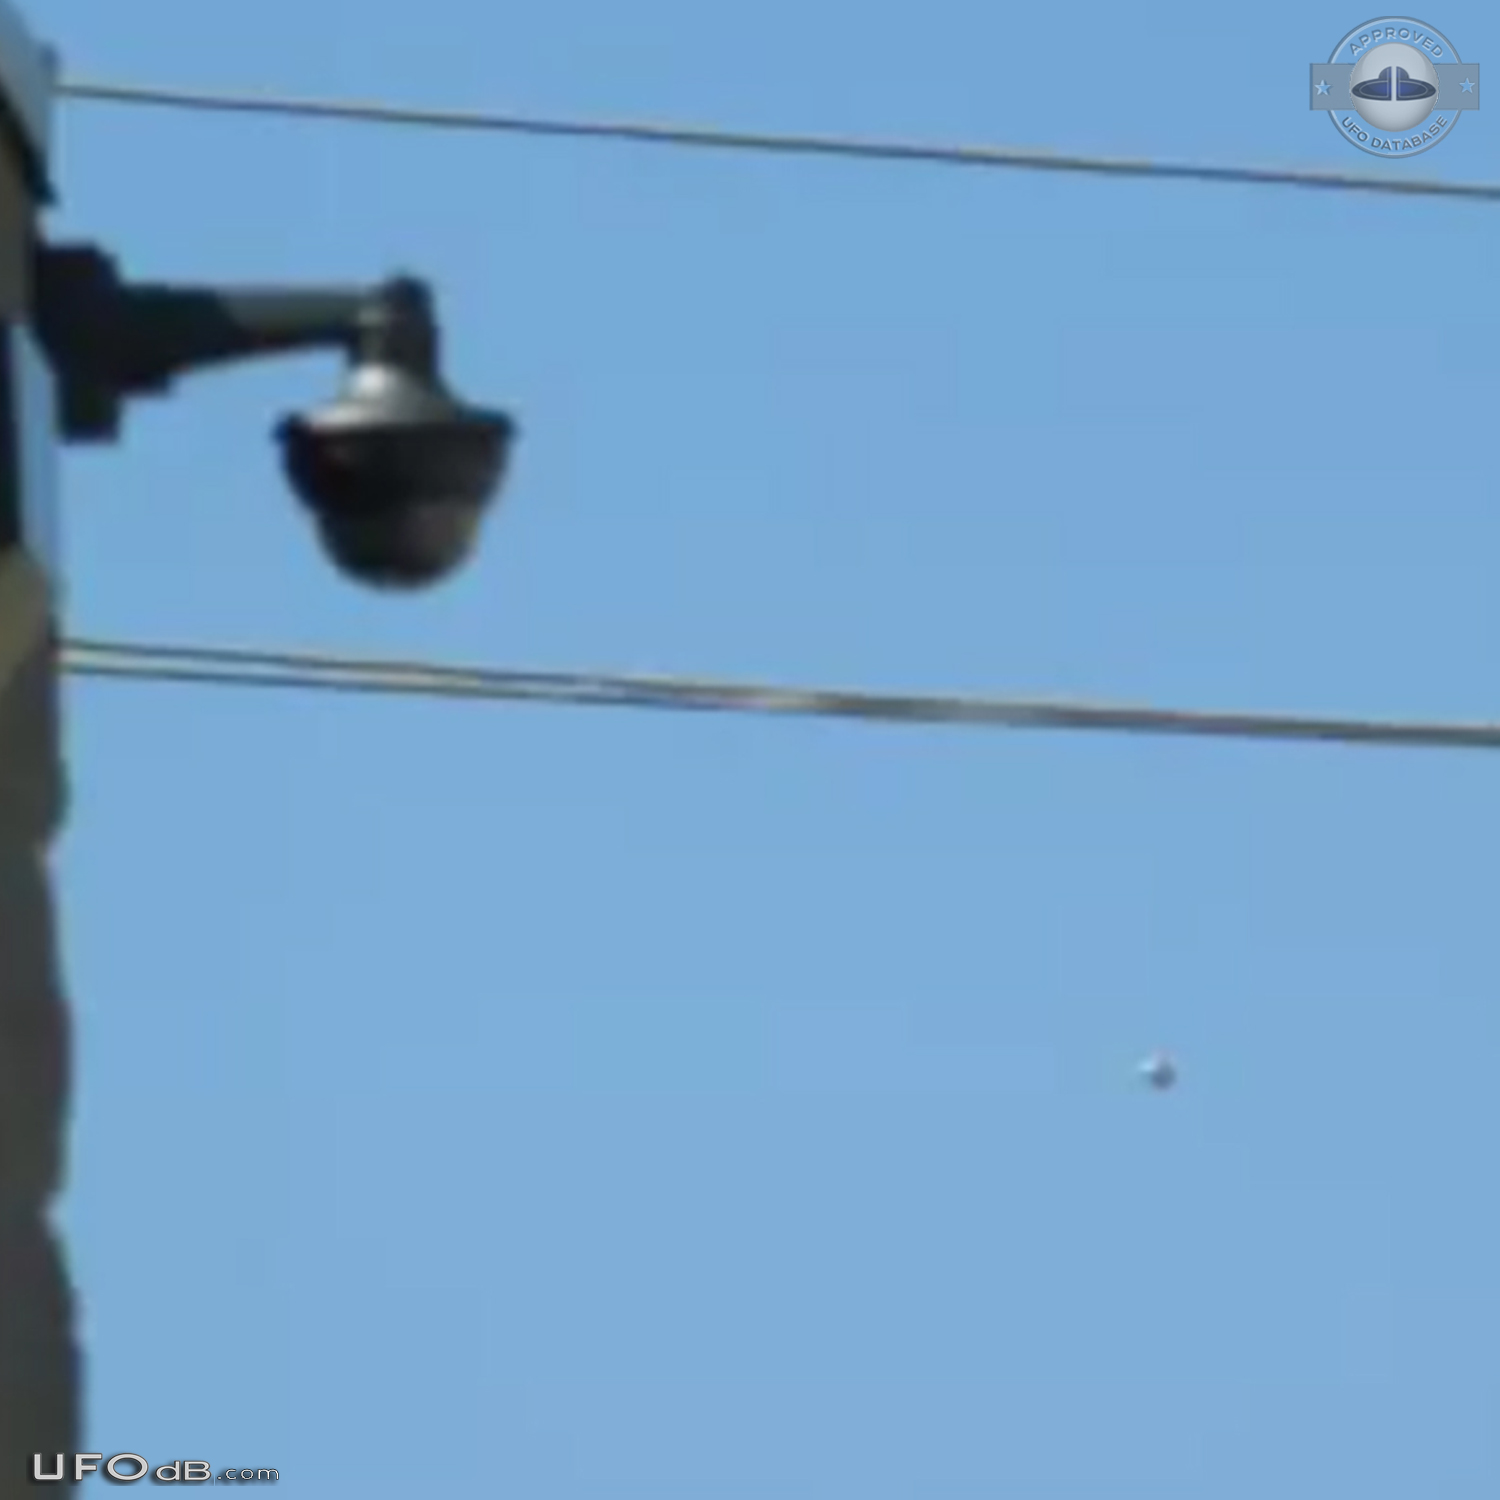 Jerky and strange UFO seen in Scarborough, Ontario canada 2015 UFO Picture #685-2